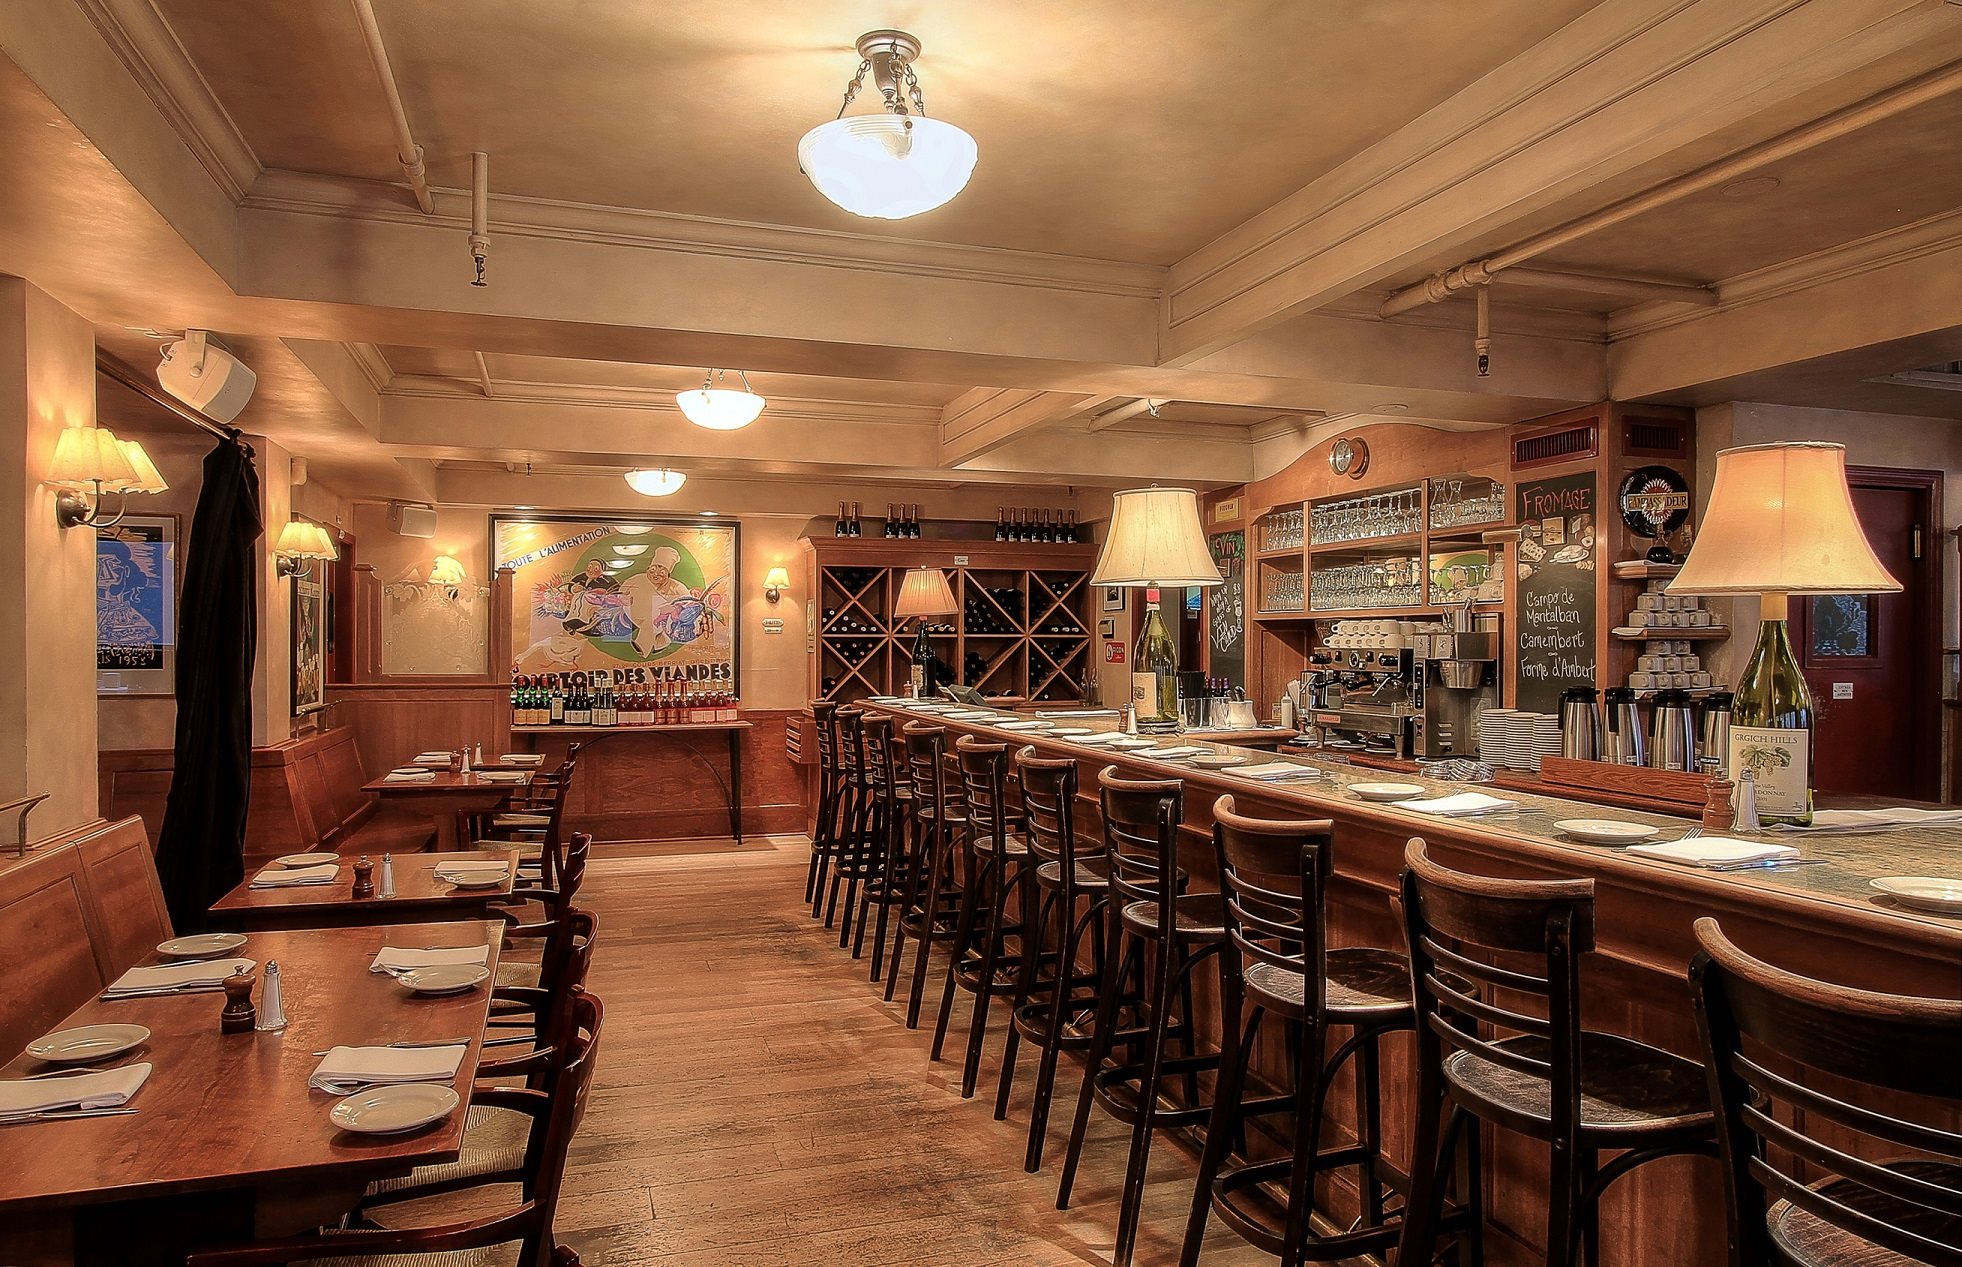 Popular Café Campagne is modeled after a traditional French brasserie. Photo courtesy of Café Campagne.